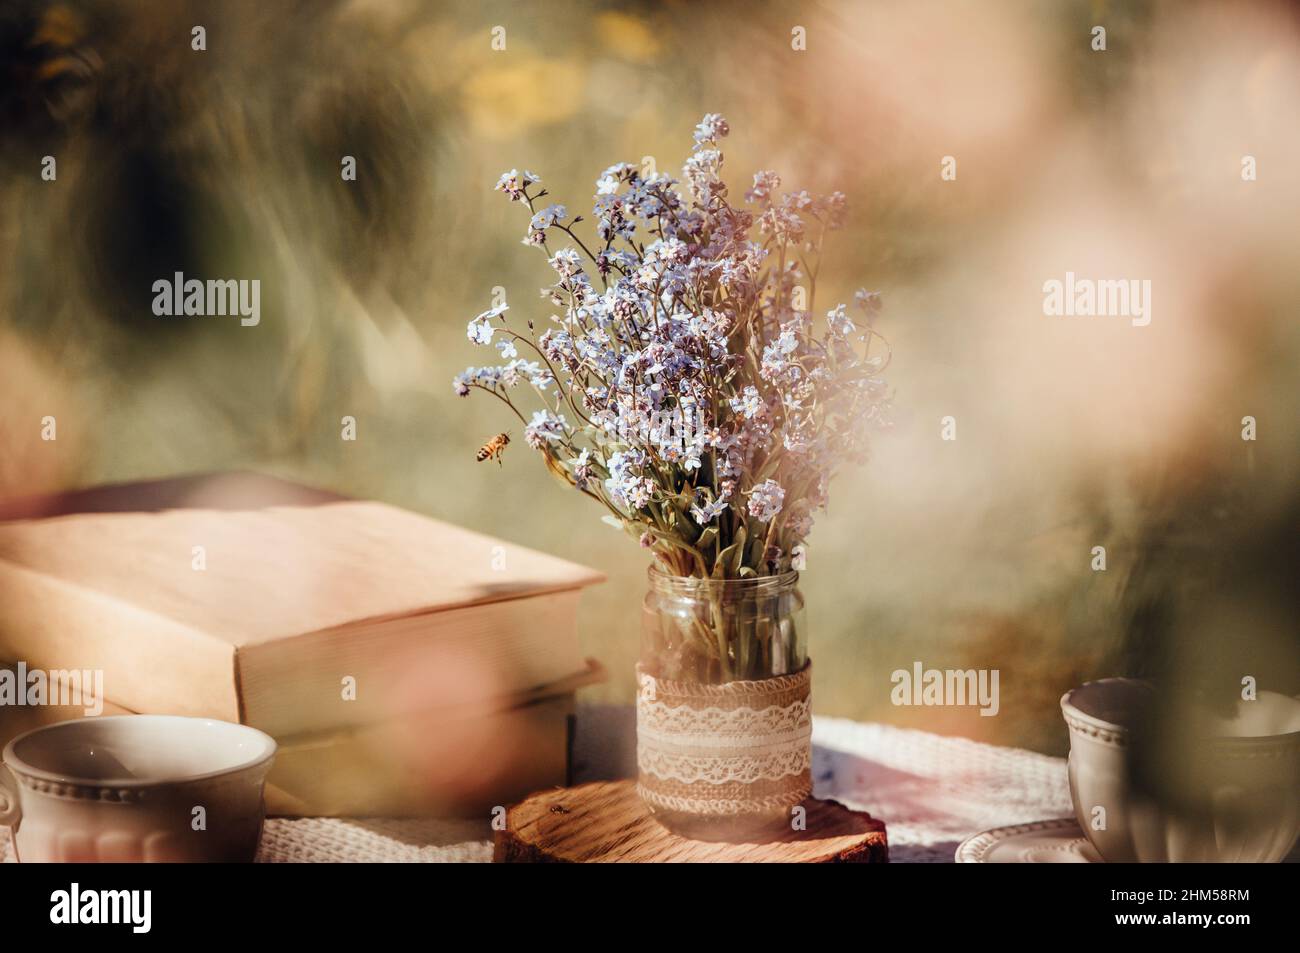 Dream like view through apple blossoms to table, set with tea cups and books. Bouquet of wildflowers Myosotis arvensis forget me nots in handmade jar. Stock Photo